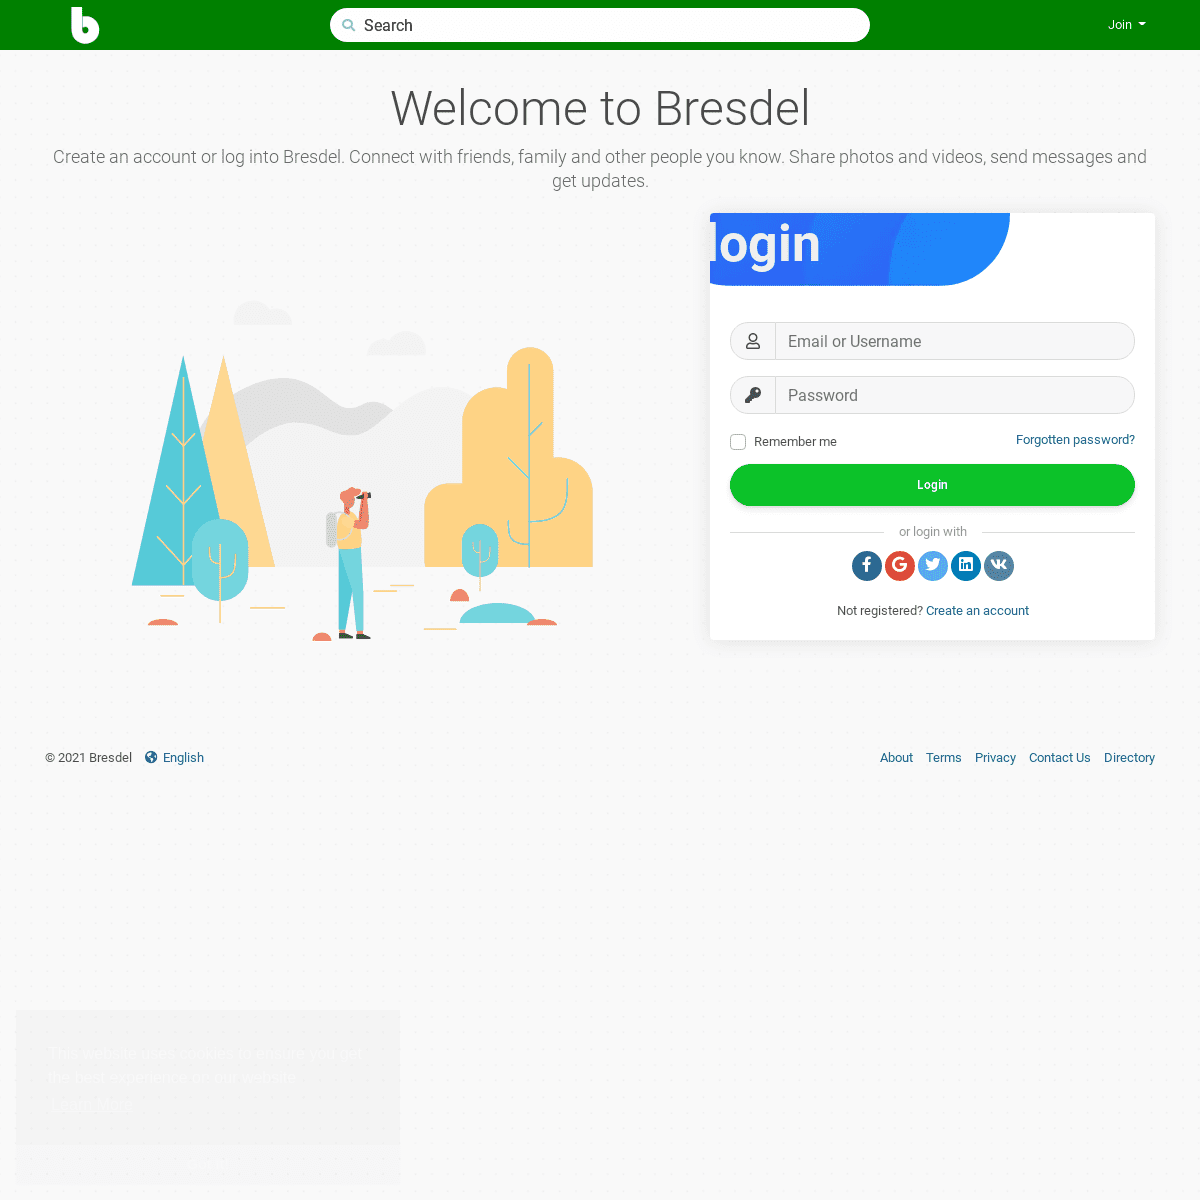 A complete backup of https://bresdel.com